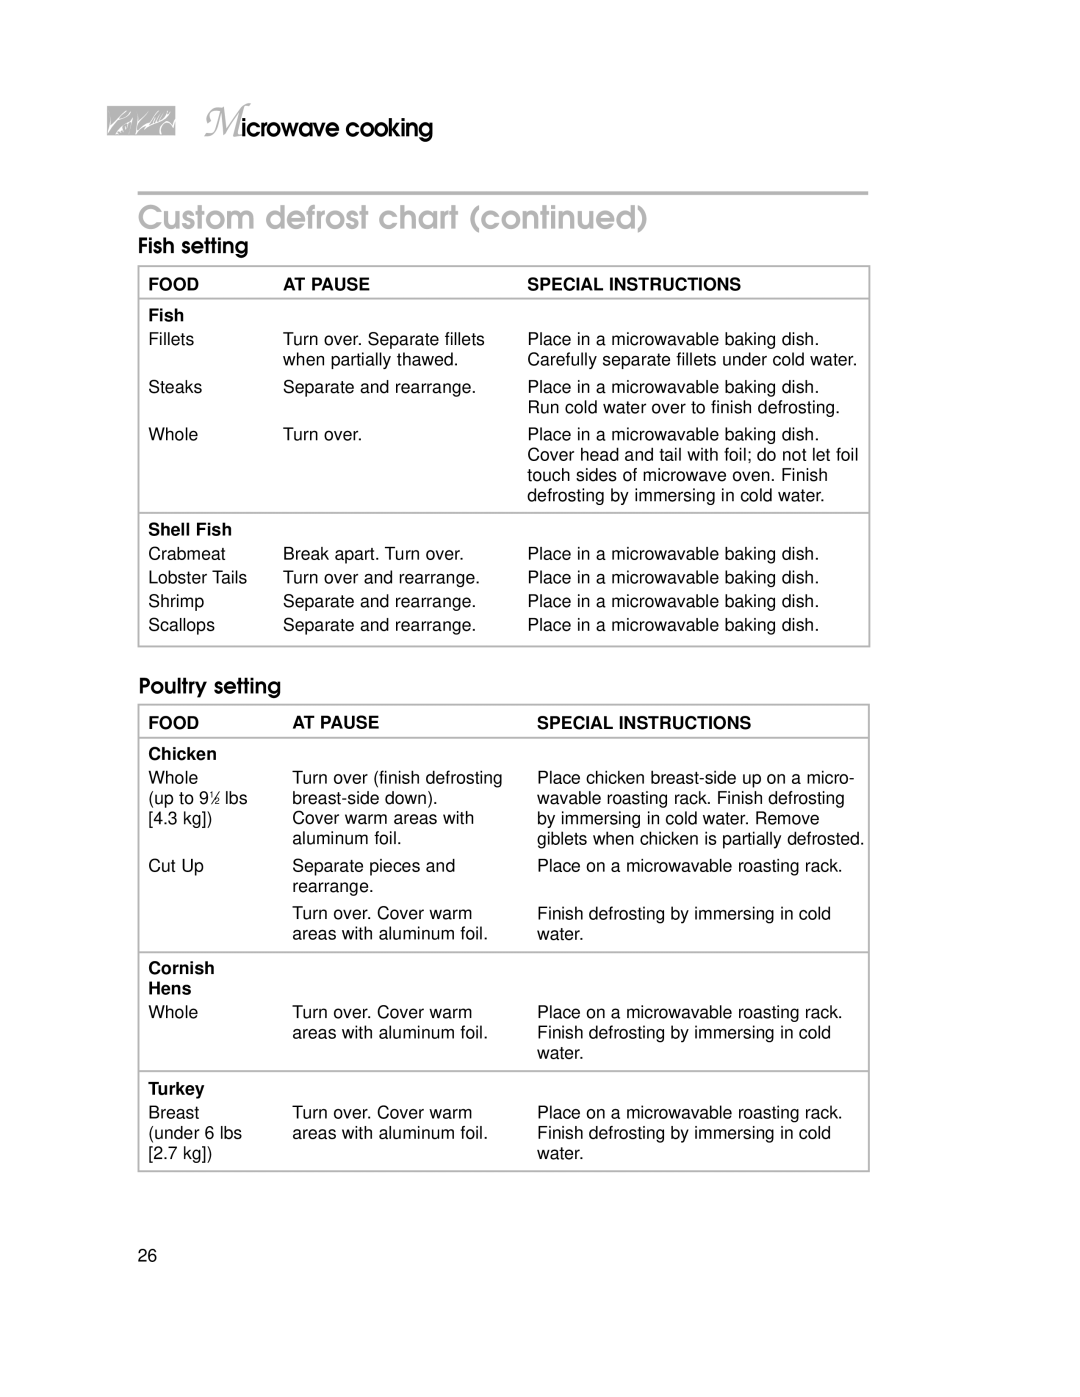 KitchenAid 3828W5A0969, YKHMC107E Custom defrost chart, Fish setting, Poultry setting, Food AT Pause Special Instructions 